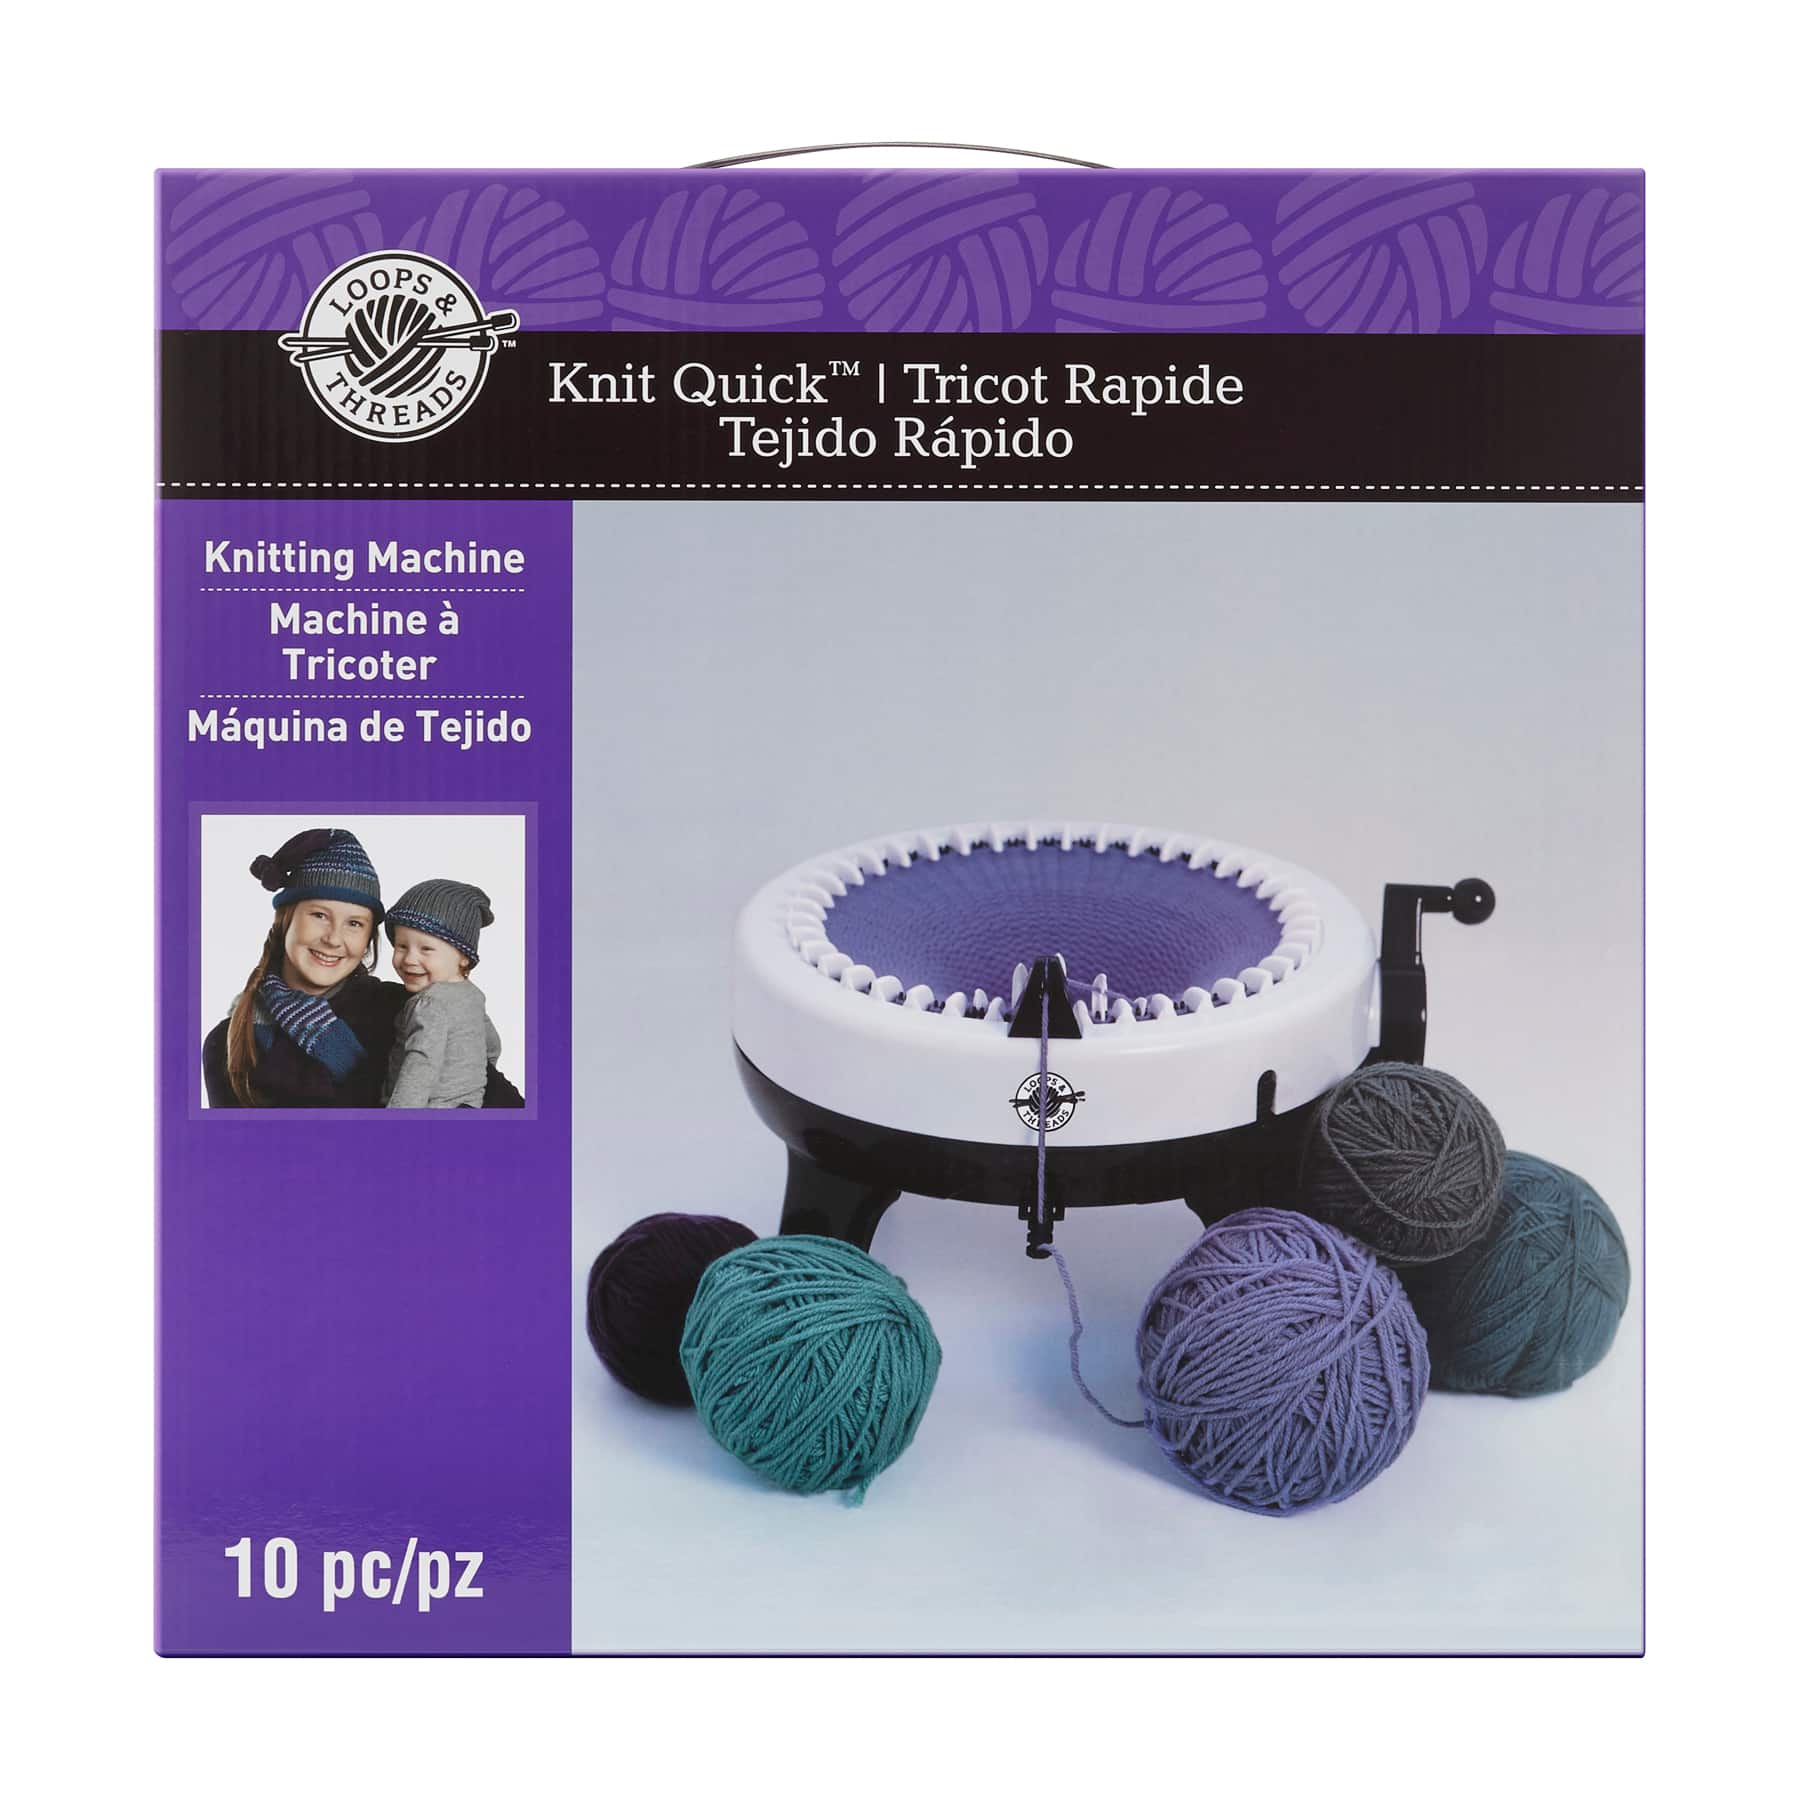 Loops & Threads Knit Quick Knitting Machine - 10 Pieces - Each